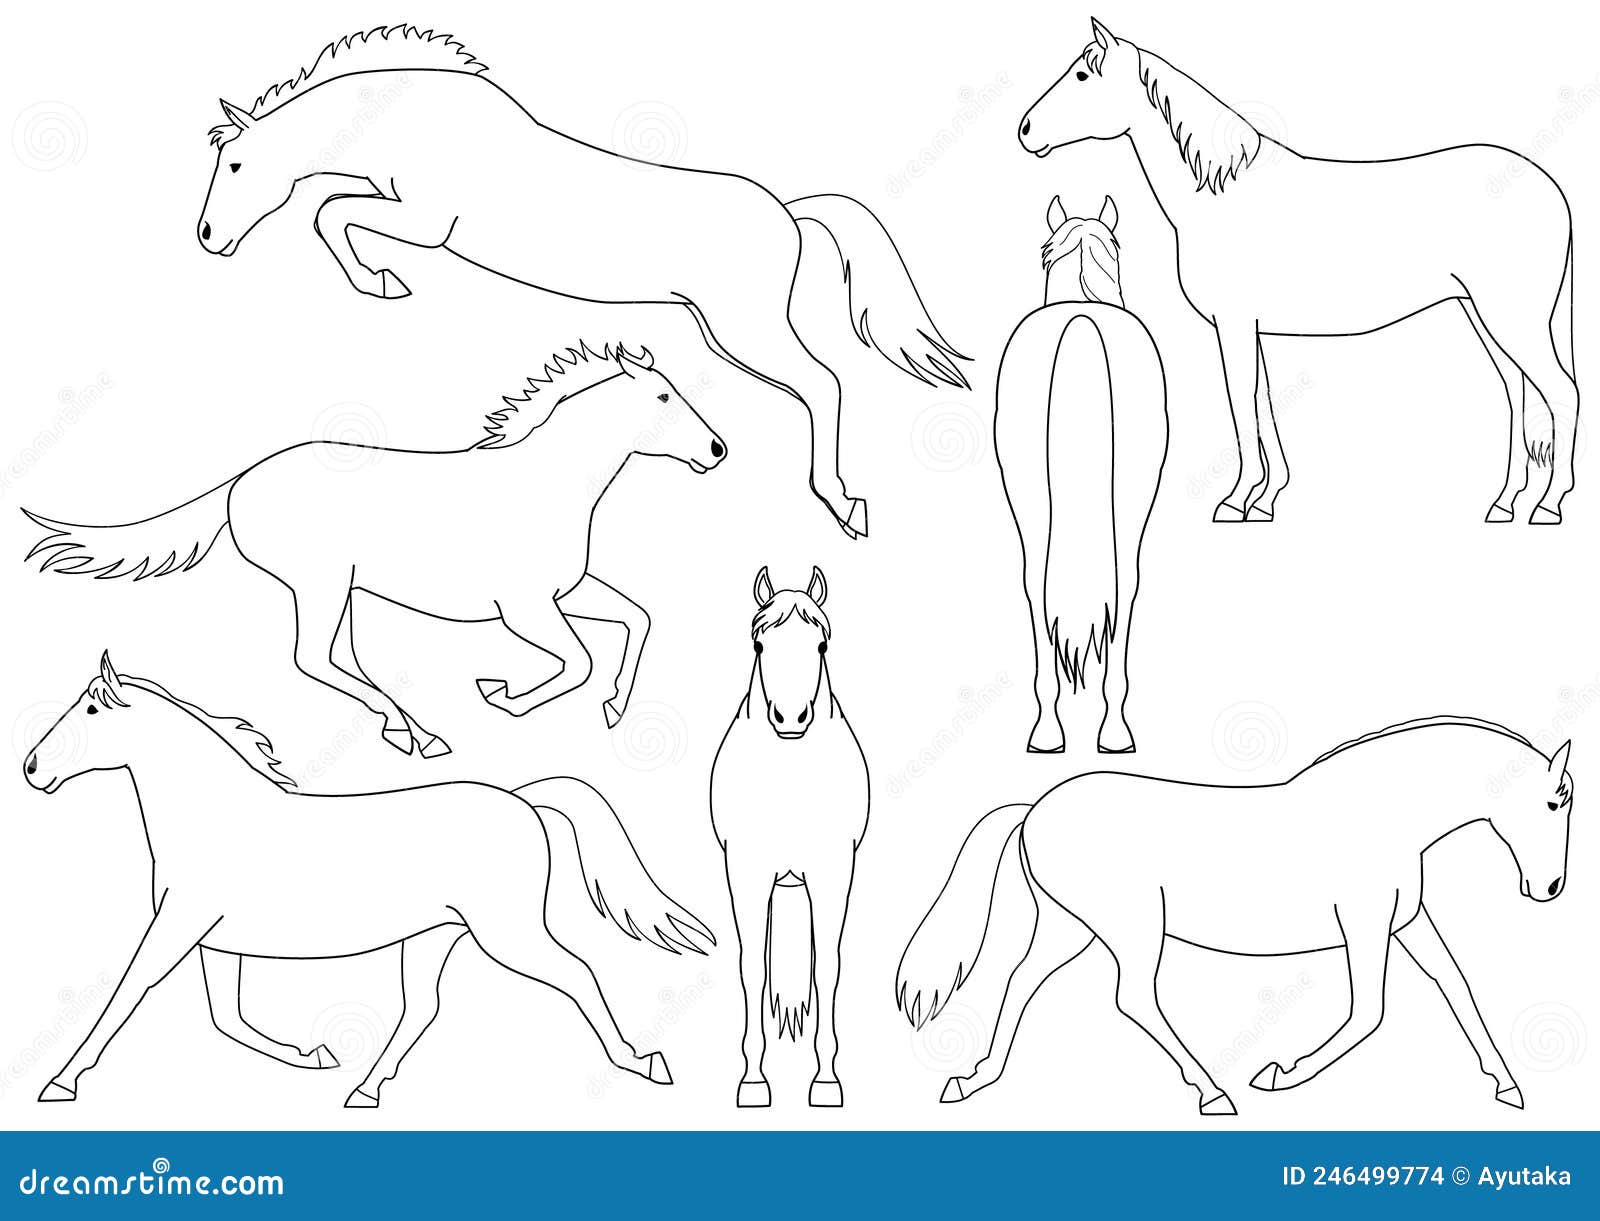 Horse Drawing Photos and Images | Shutterstock